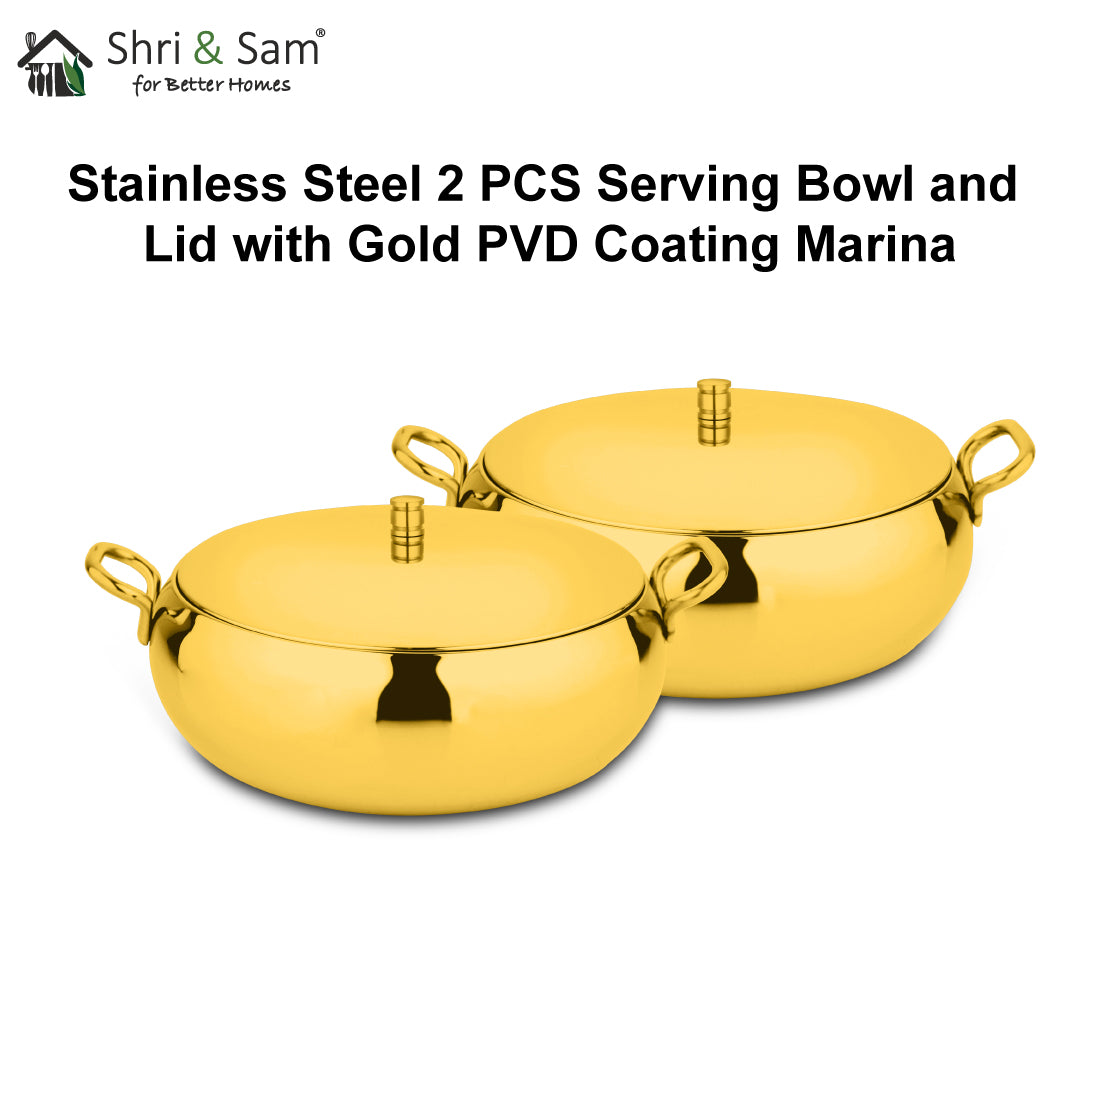 Stainless Steel 2 PCS Serving Bowl and Lid with Gold PVD Coating Marina